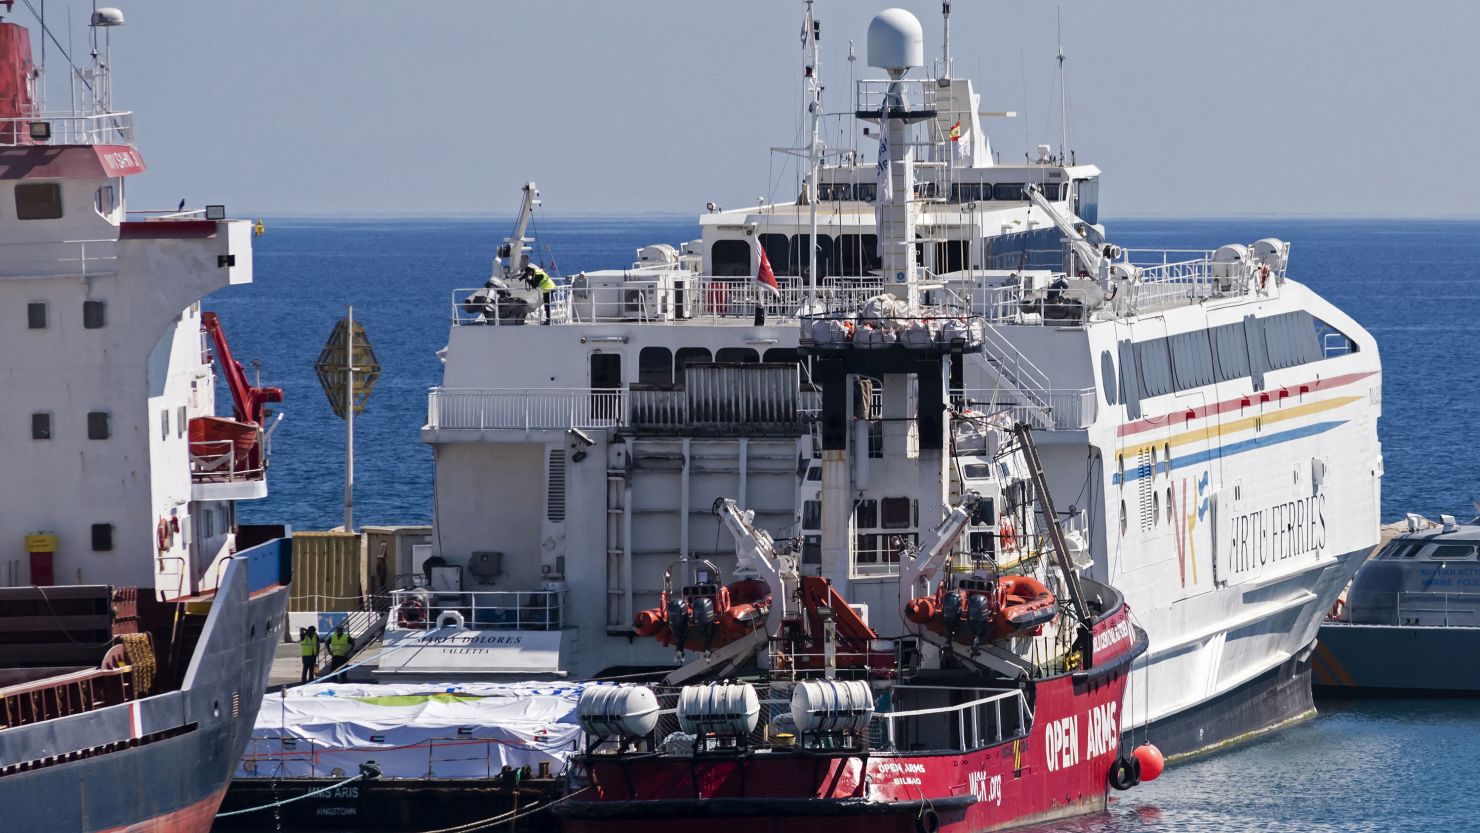 The Open Arms vessel (C) is pictured in the Cypriot port of Larnaca on March 11.